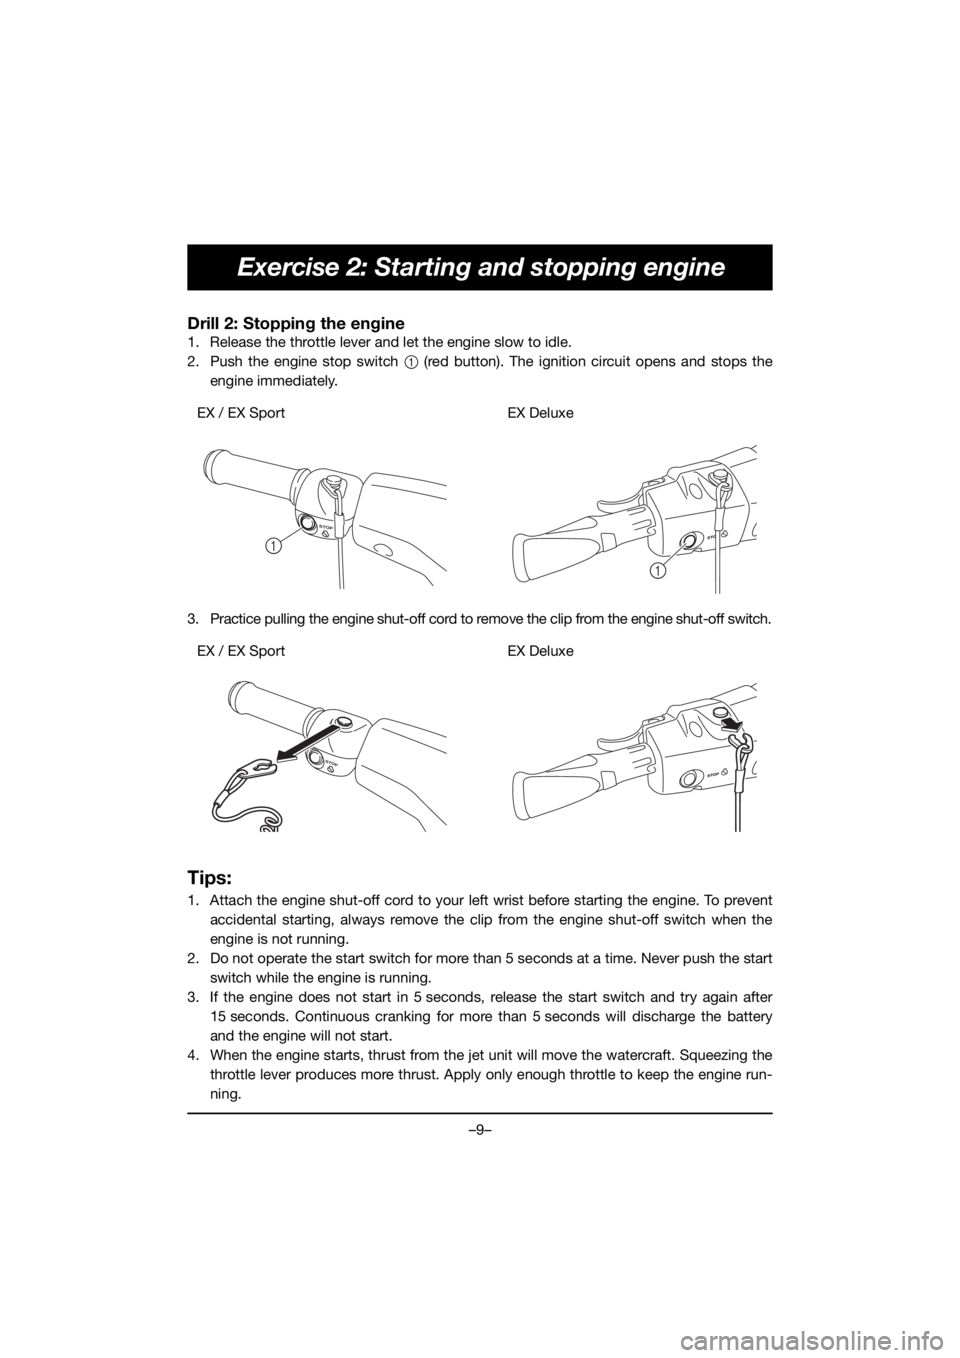 YAMAHA EX SPORT 2019  Manual de utilização (in Portuguese) –9–
Exercise 2: Starting and stopping engine
Drill 2: Stopping the engine
1. Release the throttle lever and let the engine slow to idle.
2. Push the engine stop switch 1 (red button). The ignition